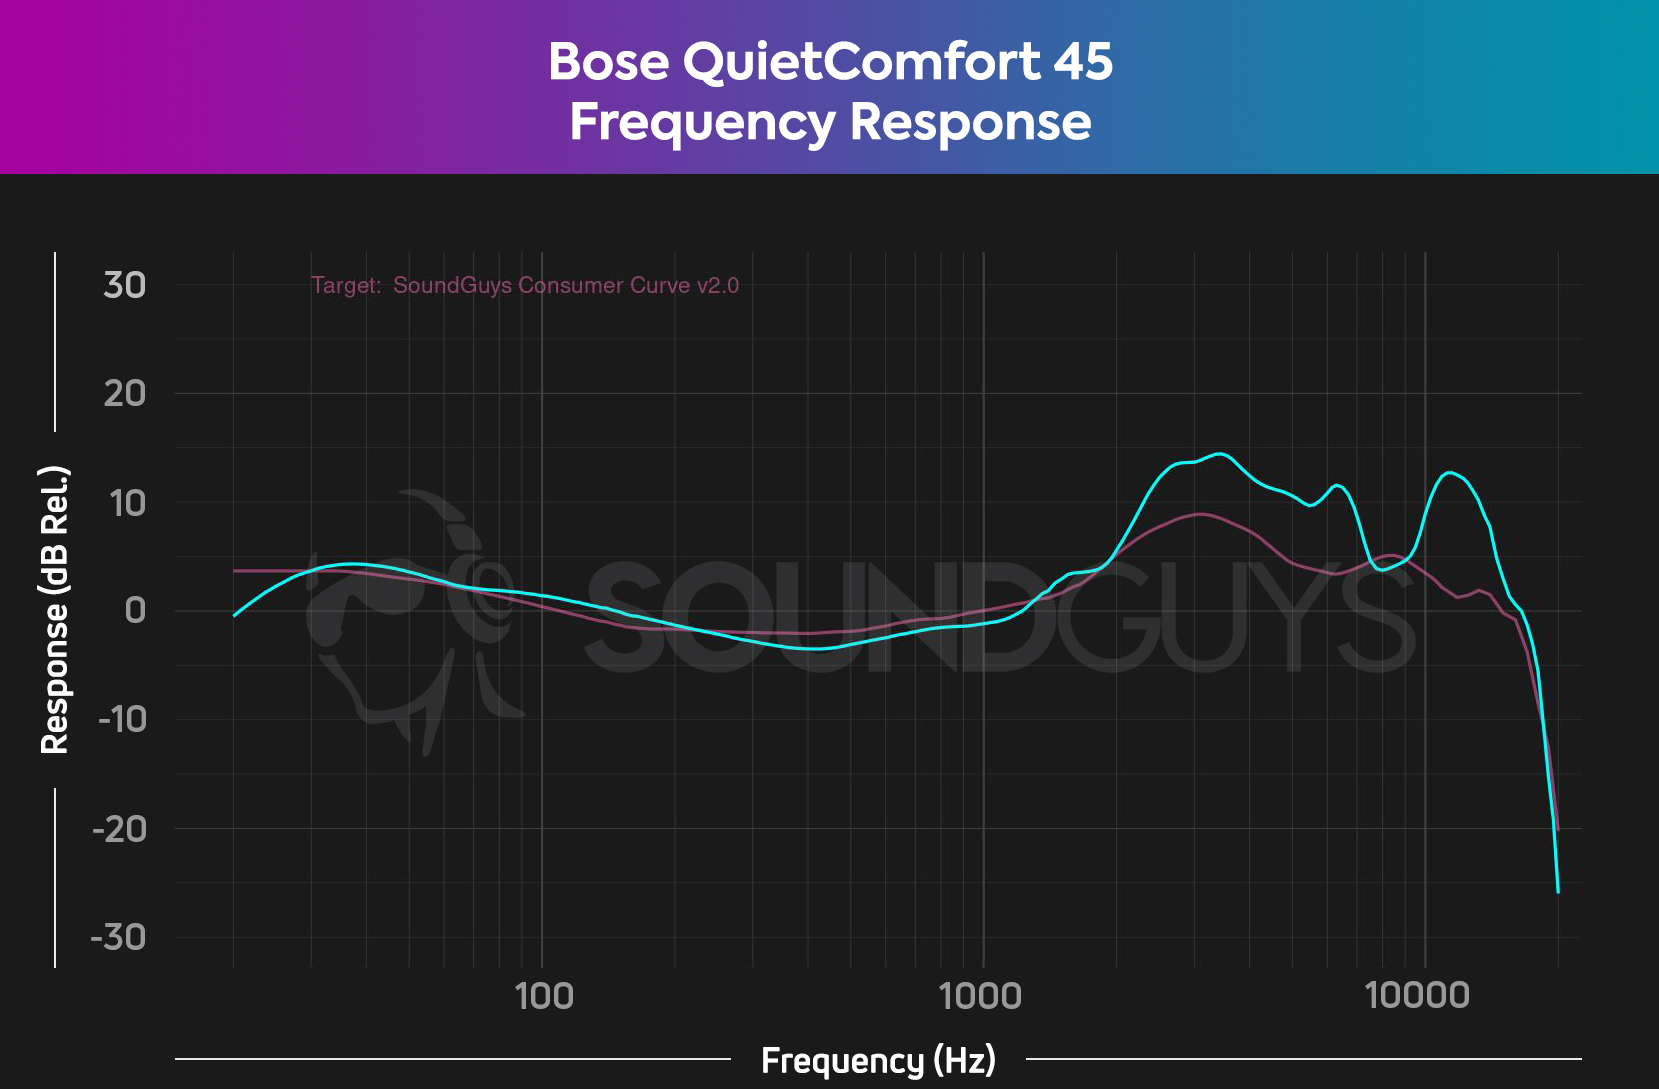 A chart showing the frequency response of the Bose QuietComfort 45 (cyan), compared to the SoundGuys house curve (pink)